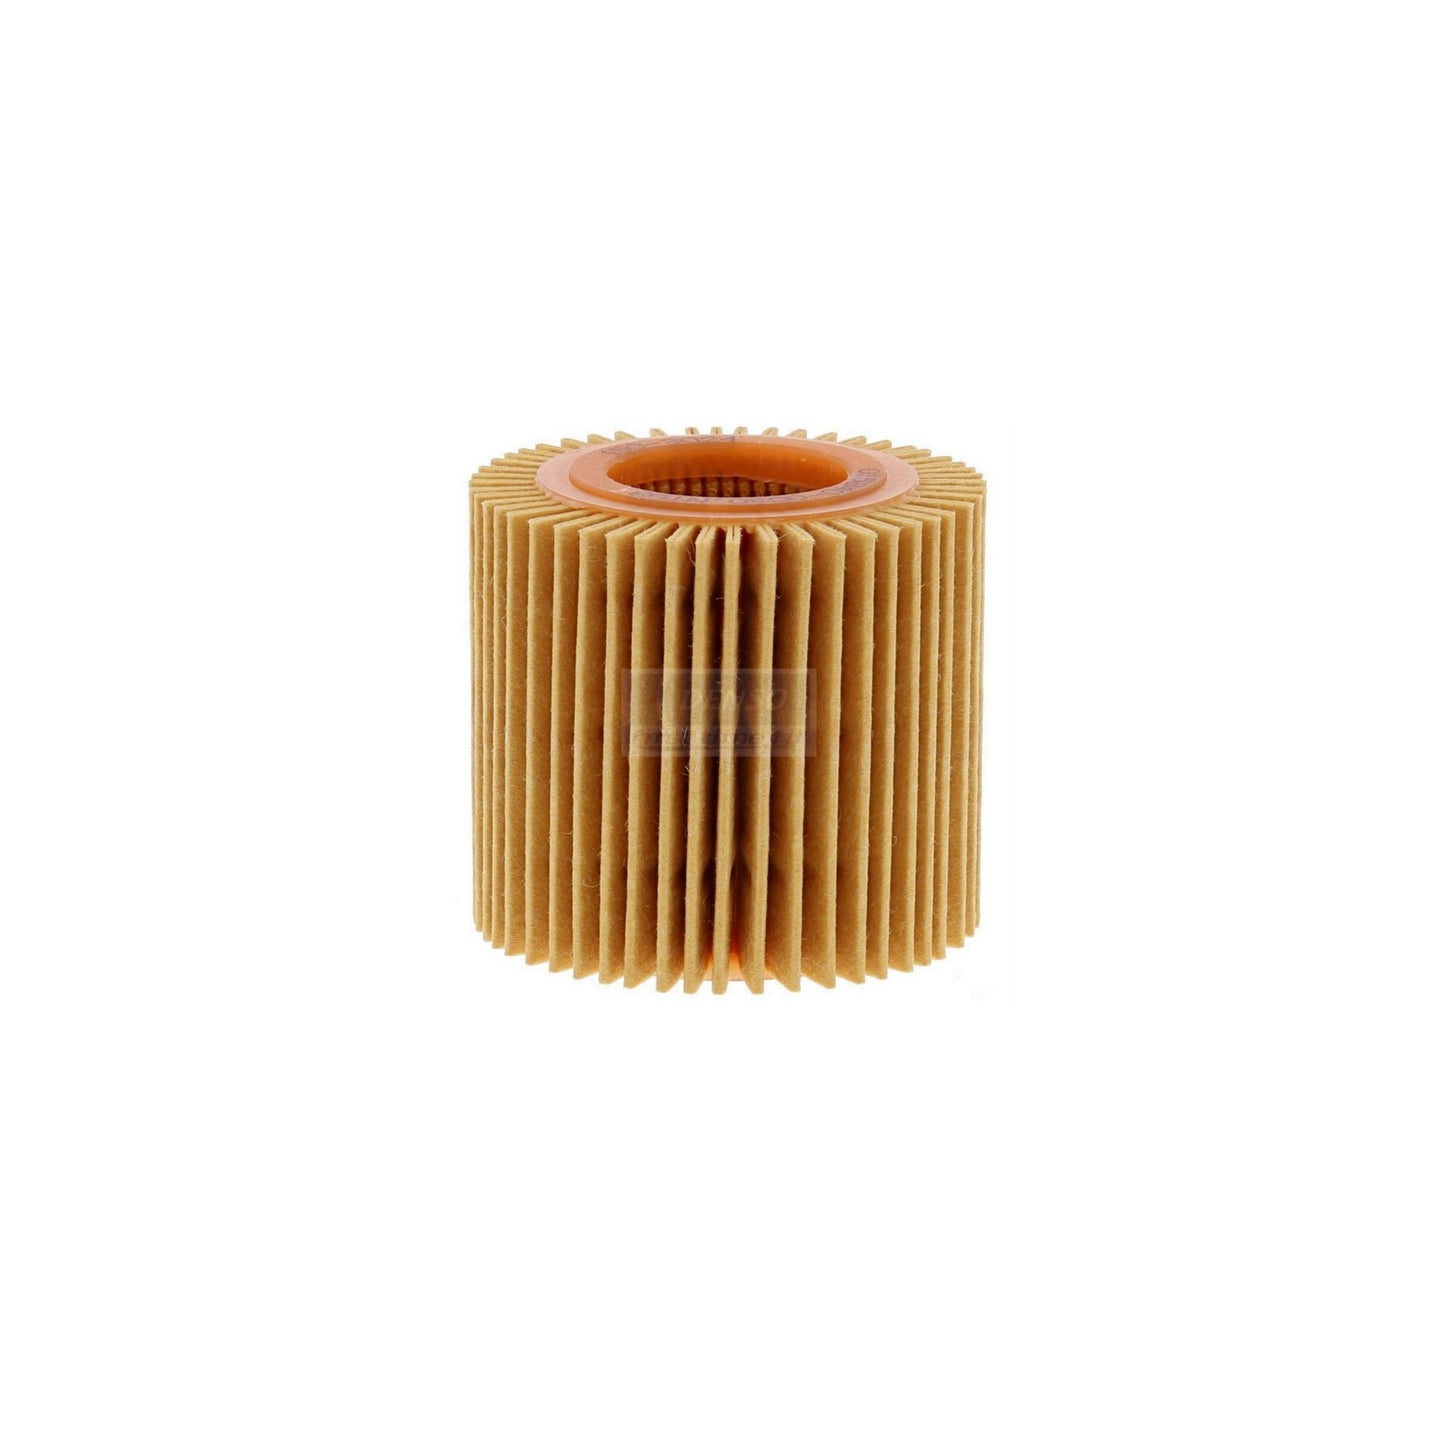 OIL FILTER ELEMENT DENSO FOR TOYOTA (DENSO PART)